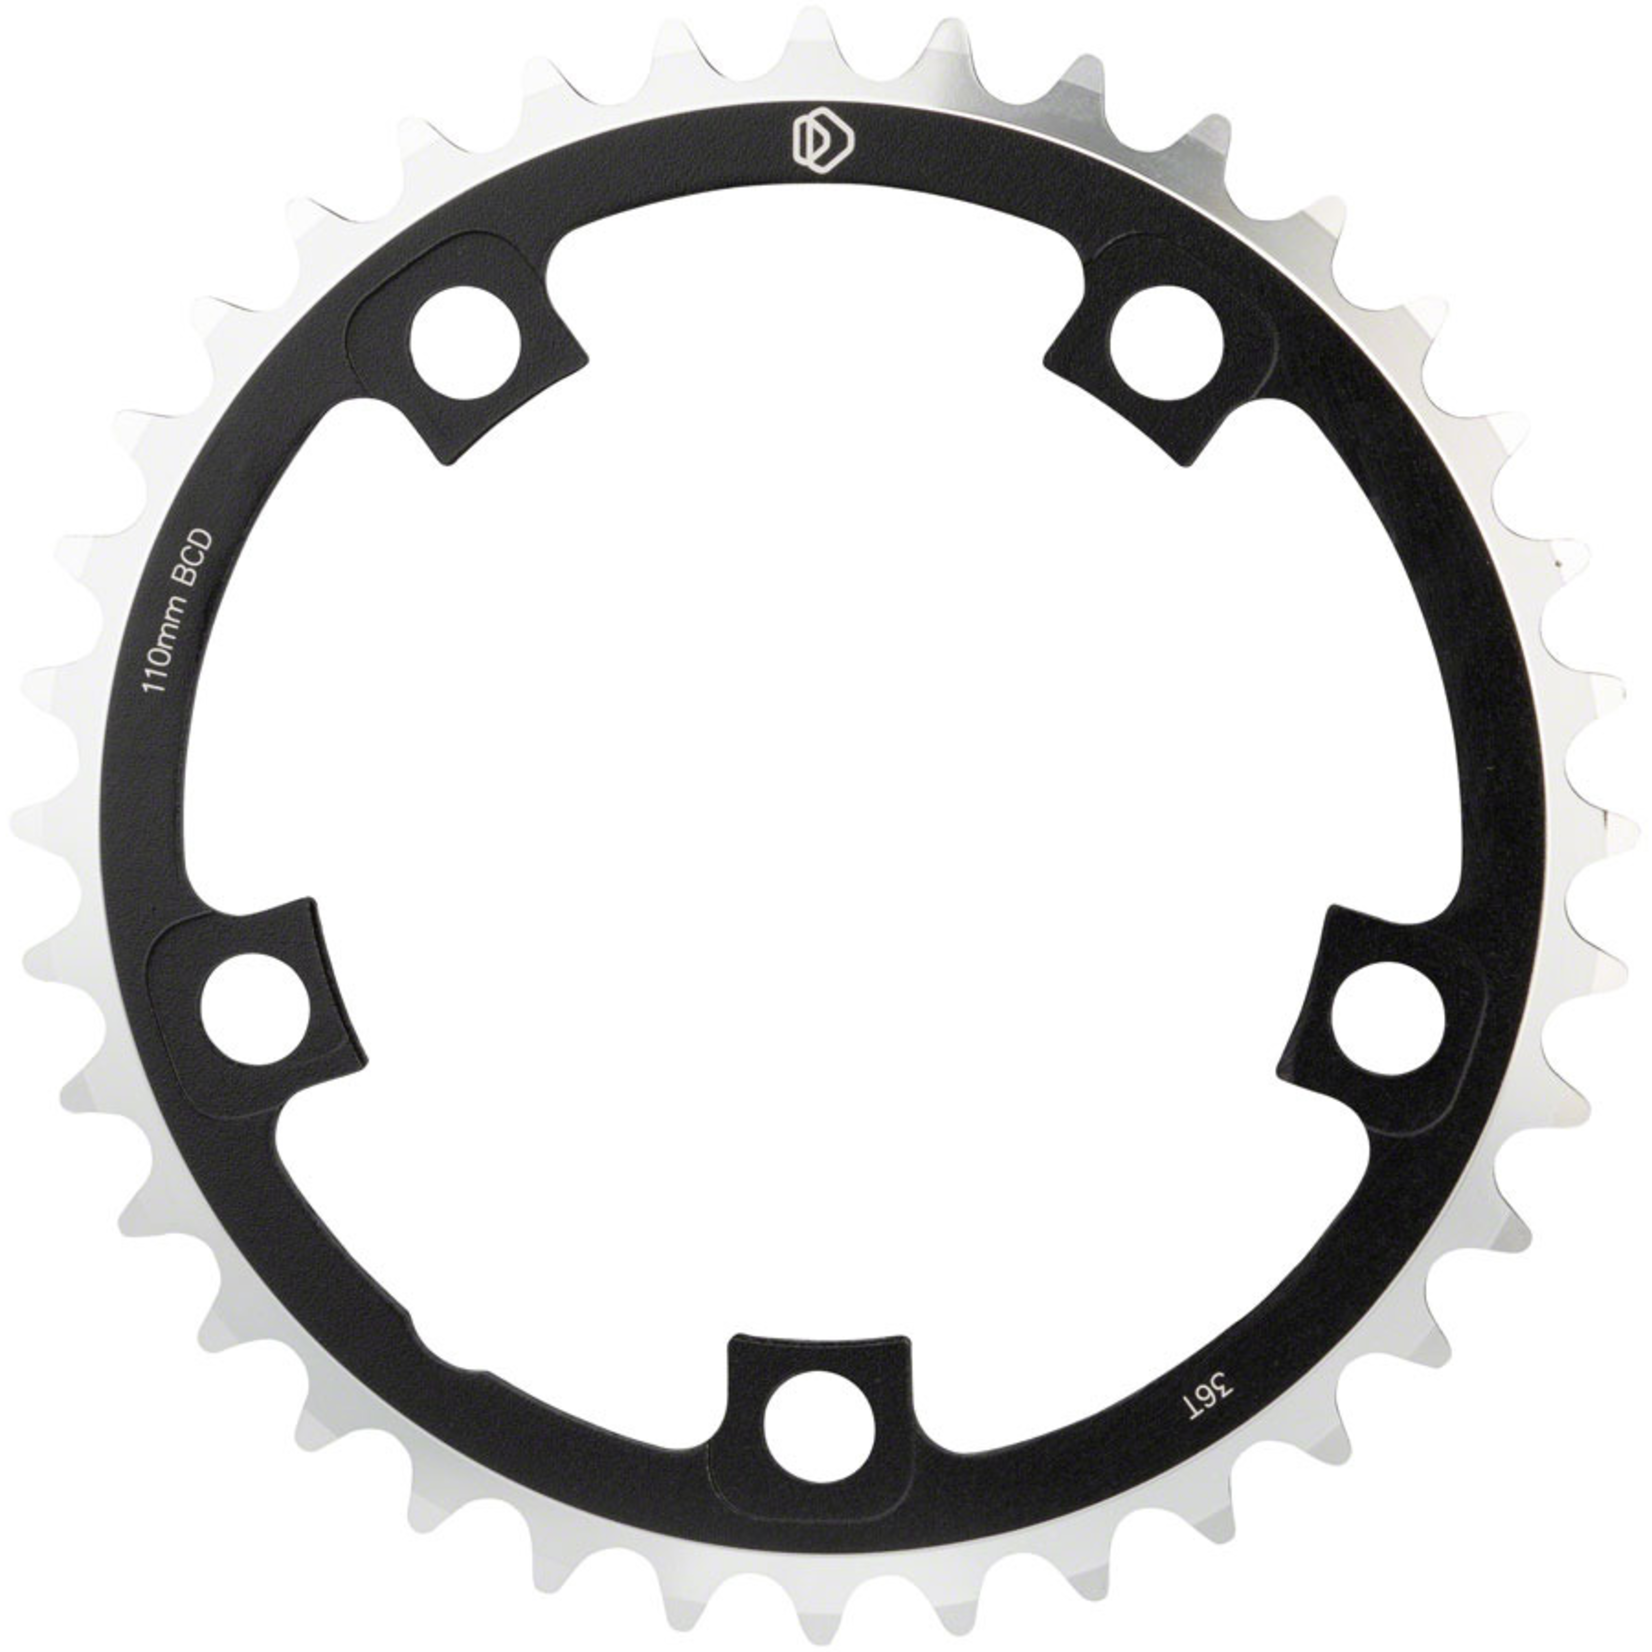 Dimension Multi Speed 36t x 110mm Middle Chainring Black